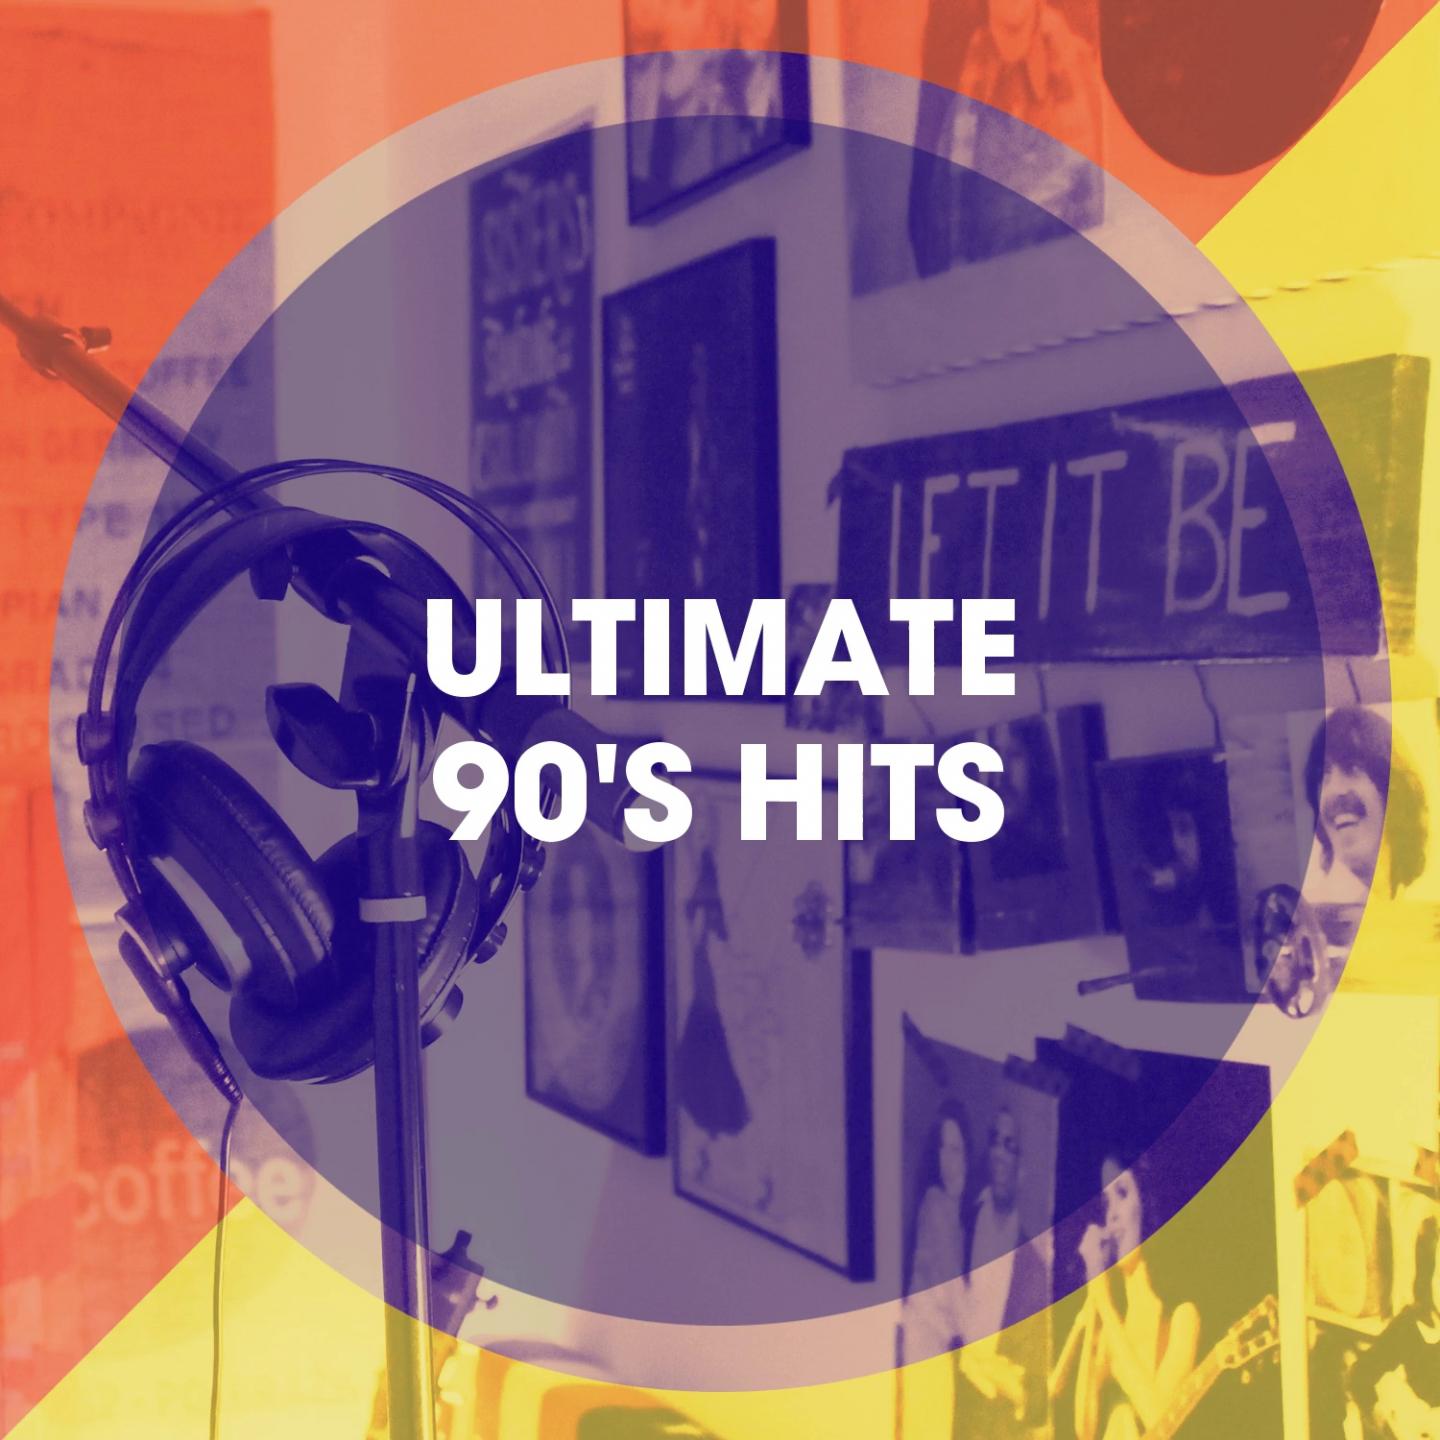 Ultimate 90's Hits